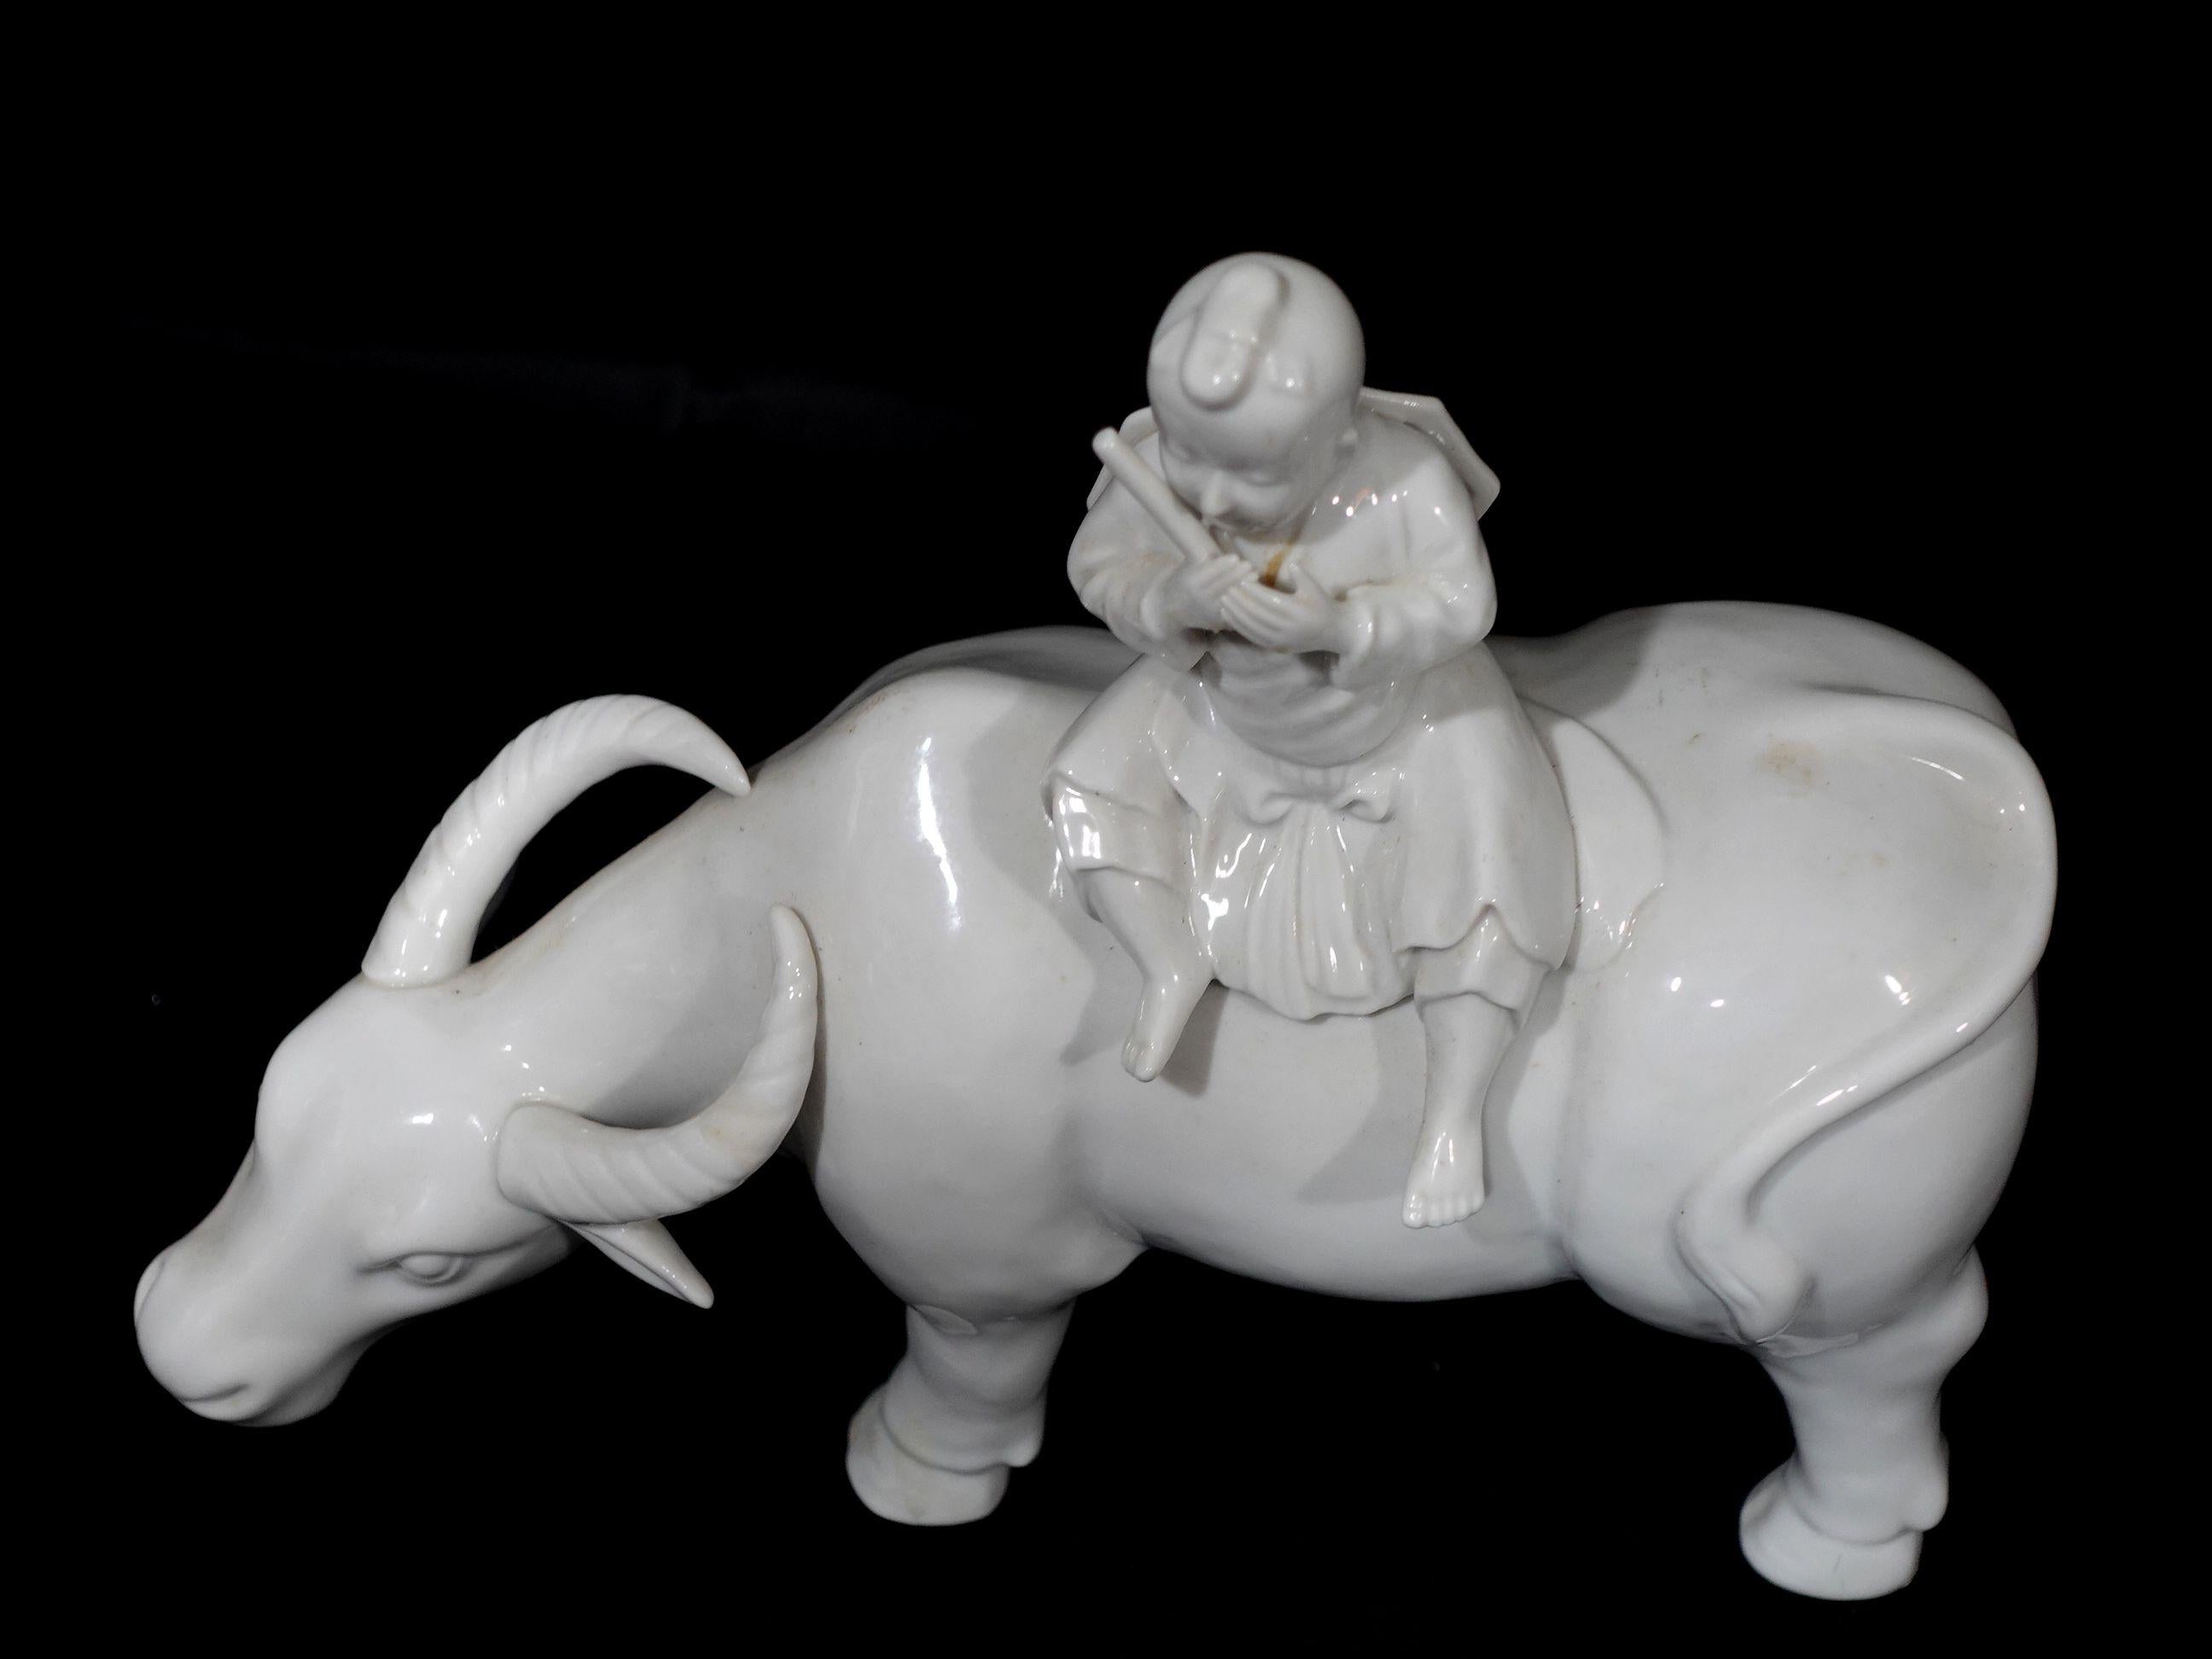 Hand-Crafted Chinese Export Porcelain Blanc de chine Water Buffalo with Child Riding For Sale